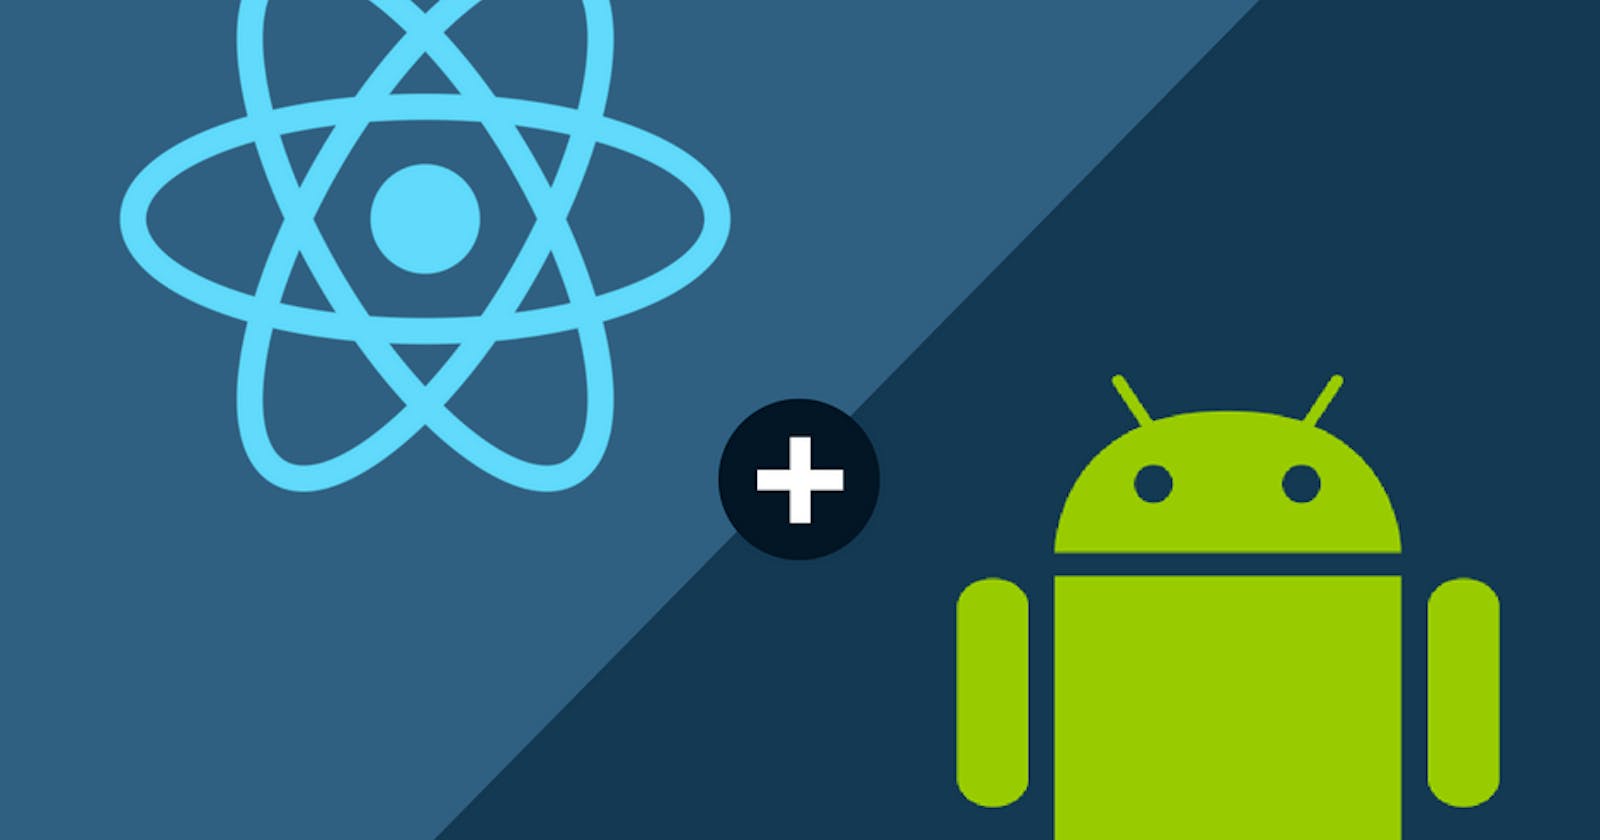 How to Setup React Native App in Windows with Android Studio and VScode.